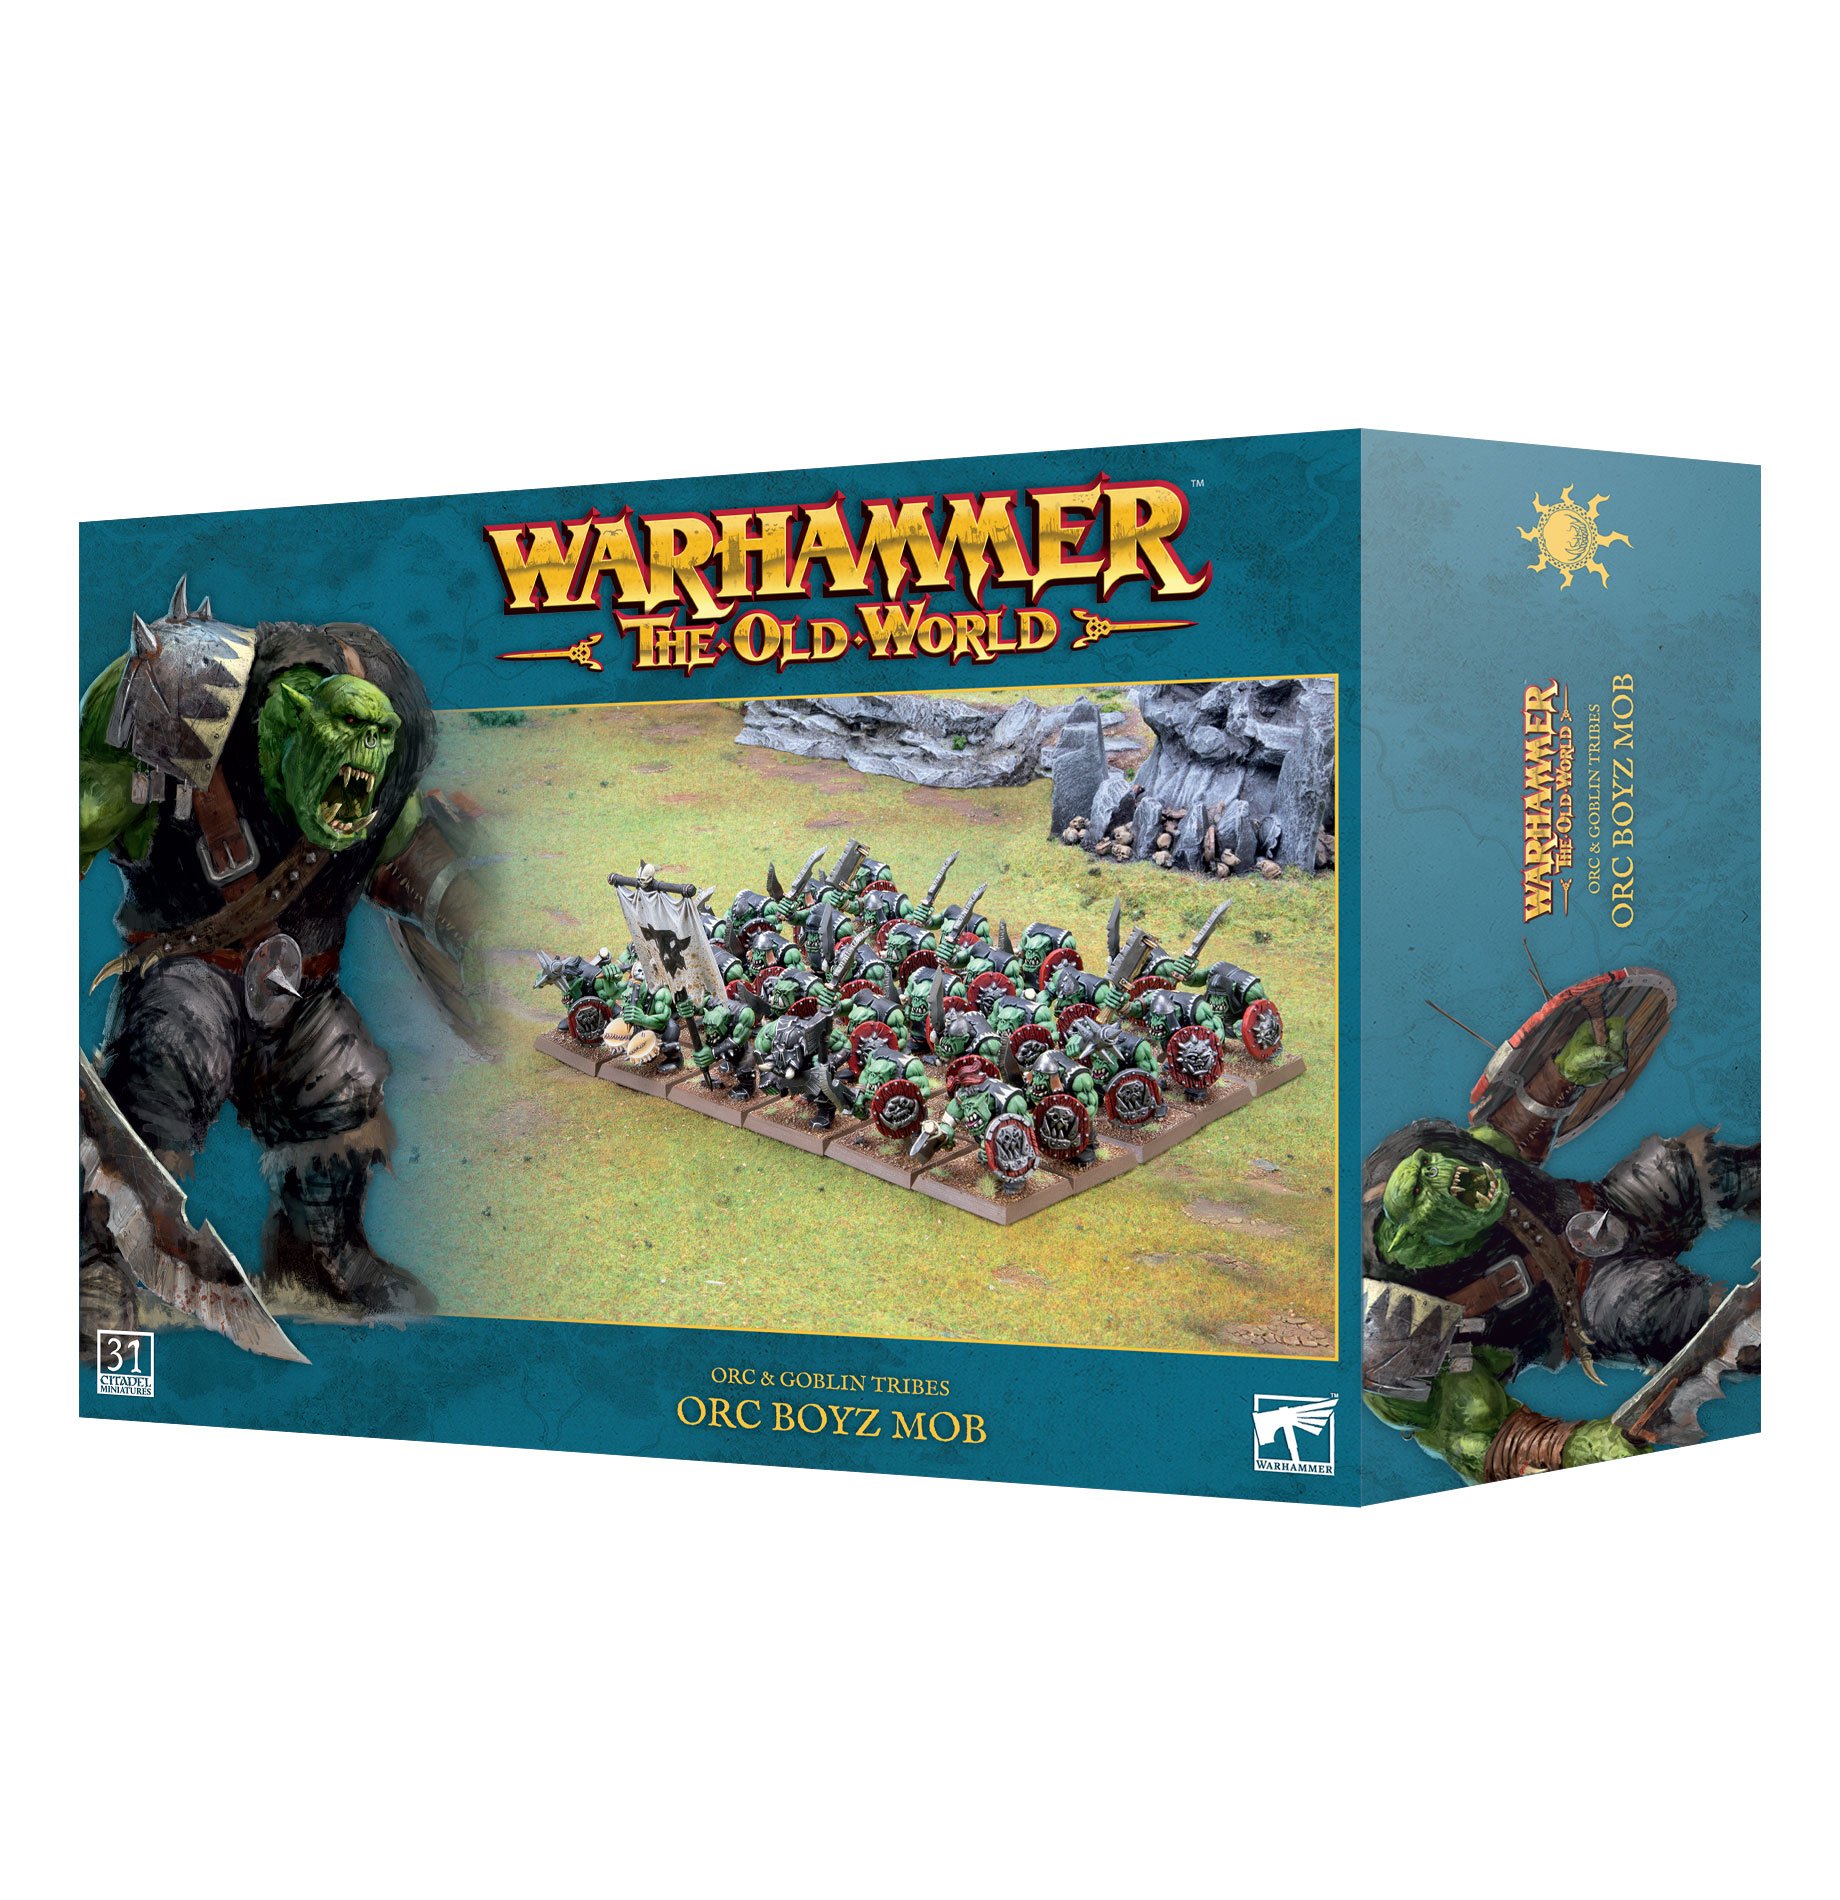 Orc Boyz Mob - Orc & Goblin Tribes - 09-02 - Warhammer - The Old World